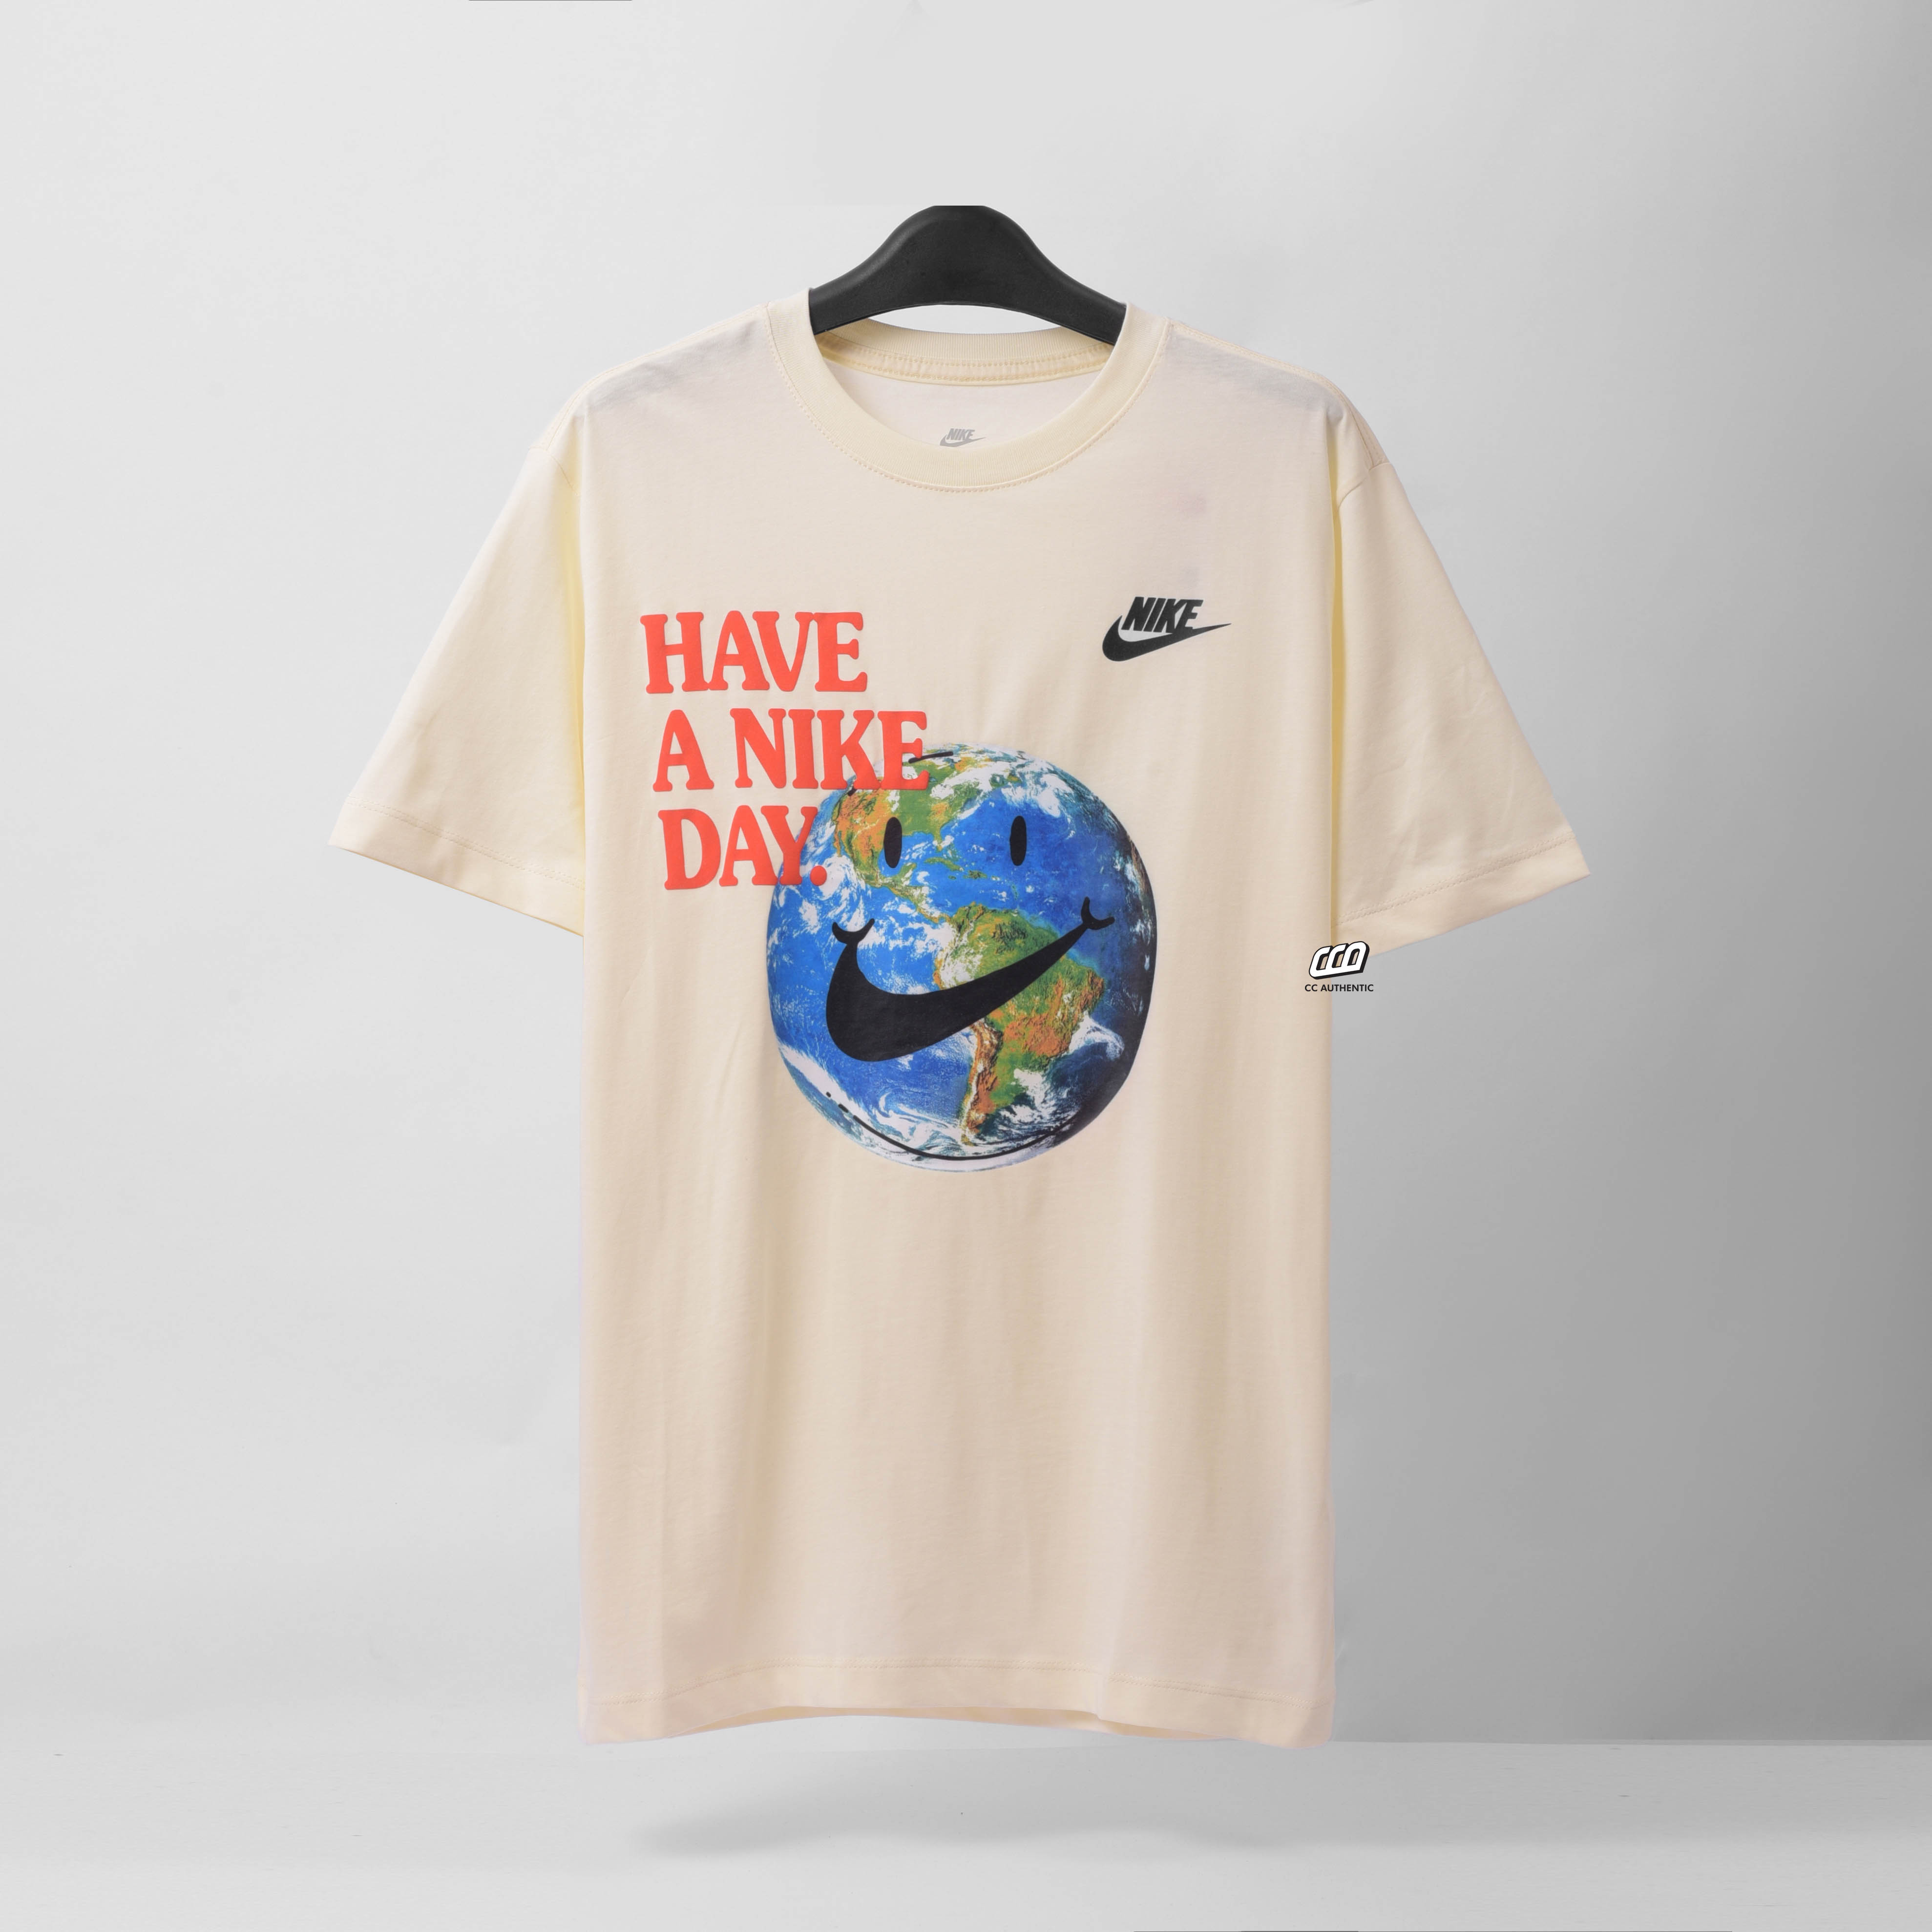 NIKE HAVE A NIKE DAY T-SHIRT - CREAM